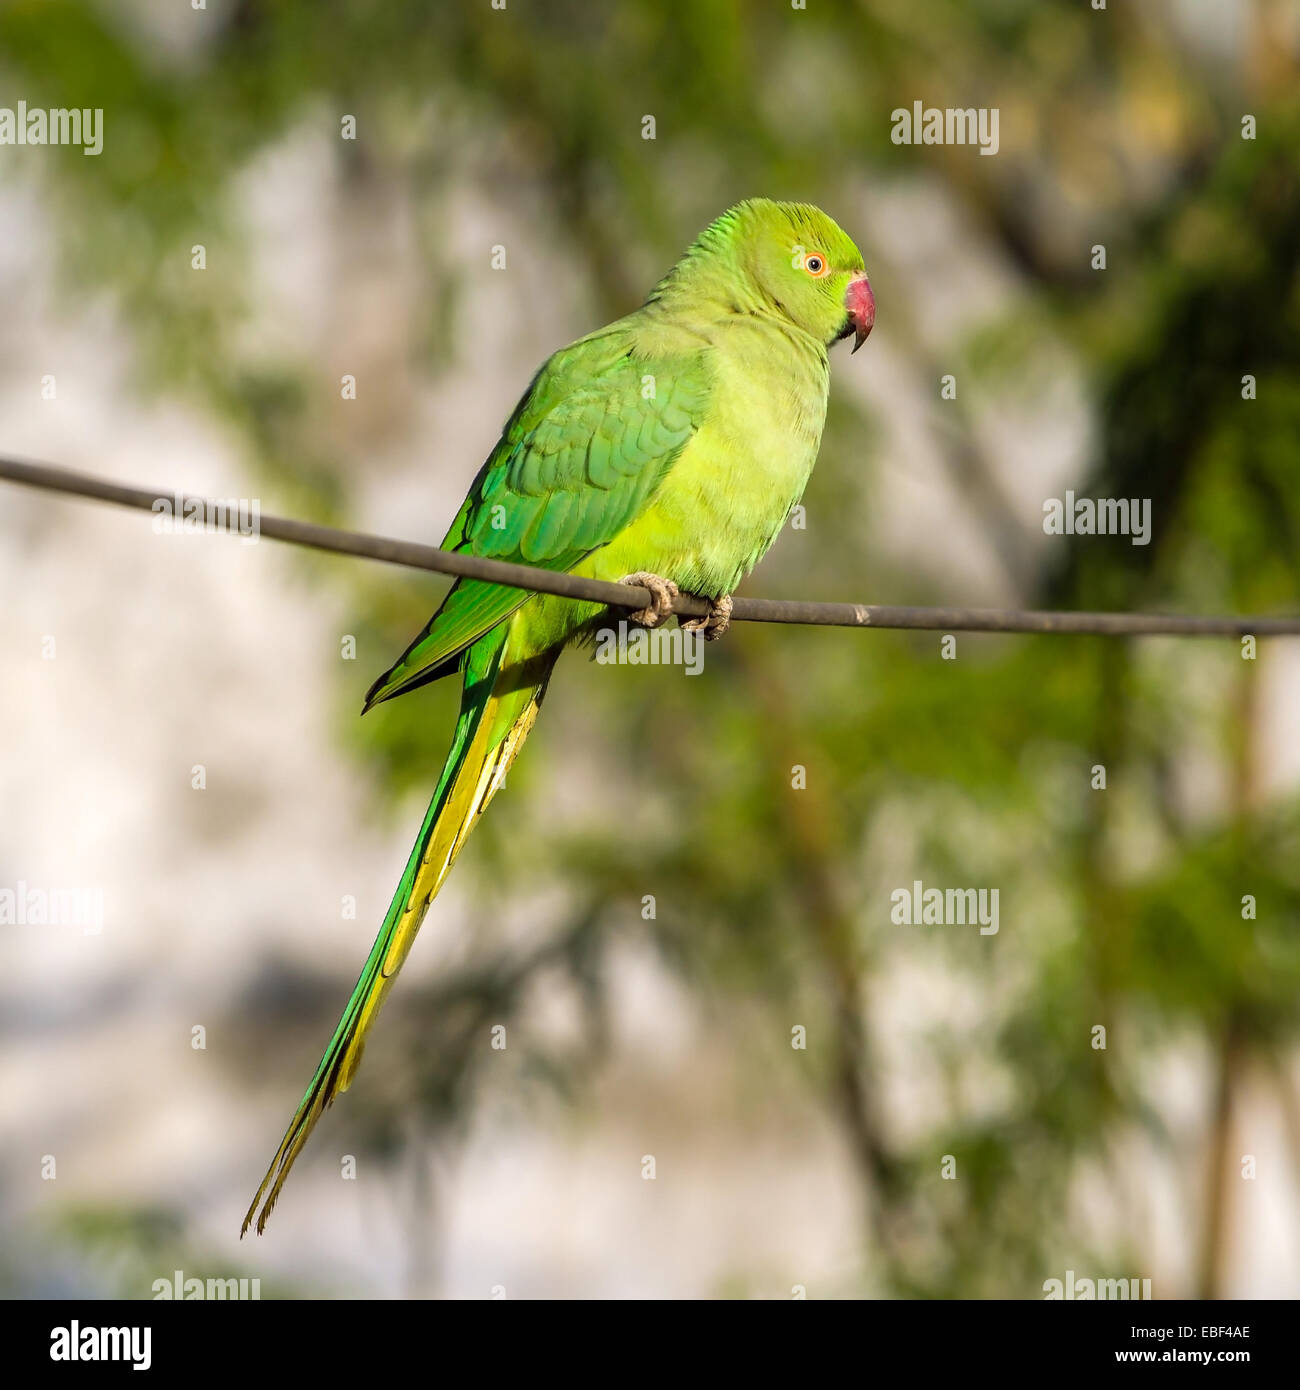 Green Indian Ringnecked Parakeet parrot on the wire Stock Photo